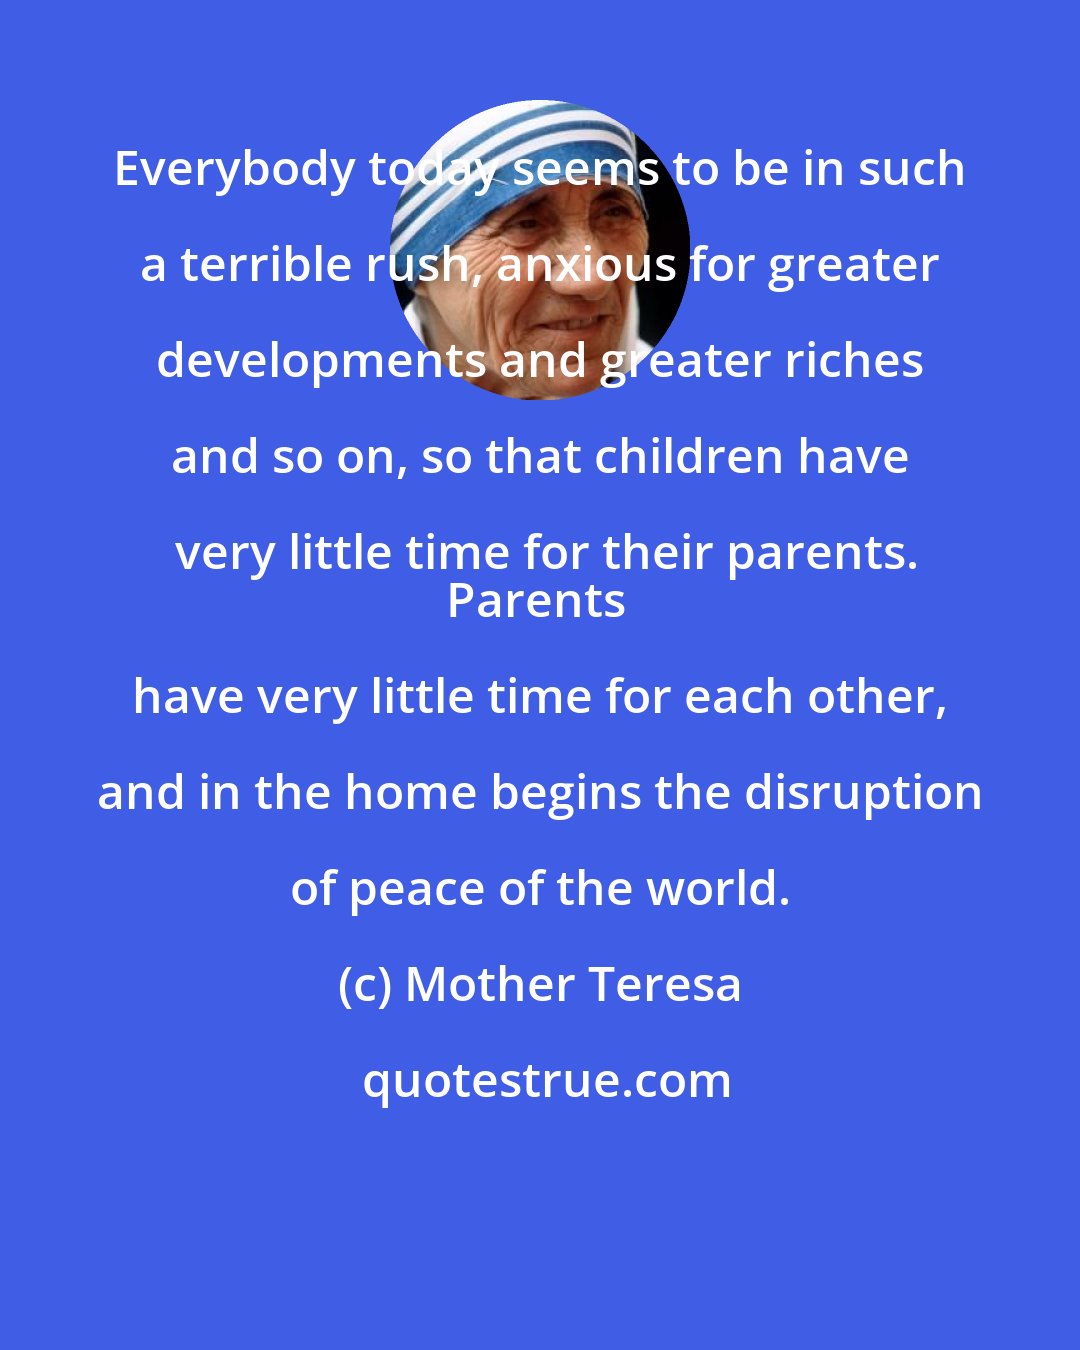 Mother Teresa: Everybody today seems to be in such a terrible rush, anxious for greater developments and greater riches and so on, so that children have very little time for their parents.
Parents have very little time for each other, and in the home begins the disruption of peace of the world.